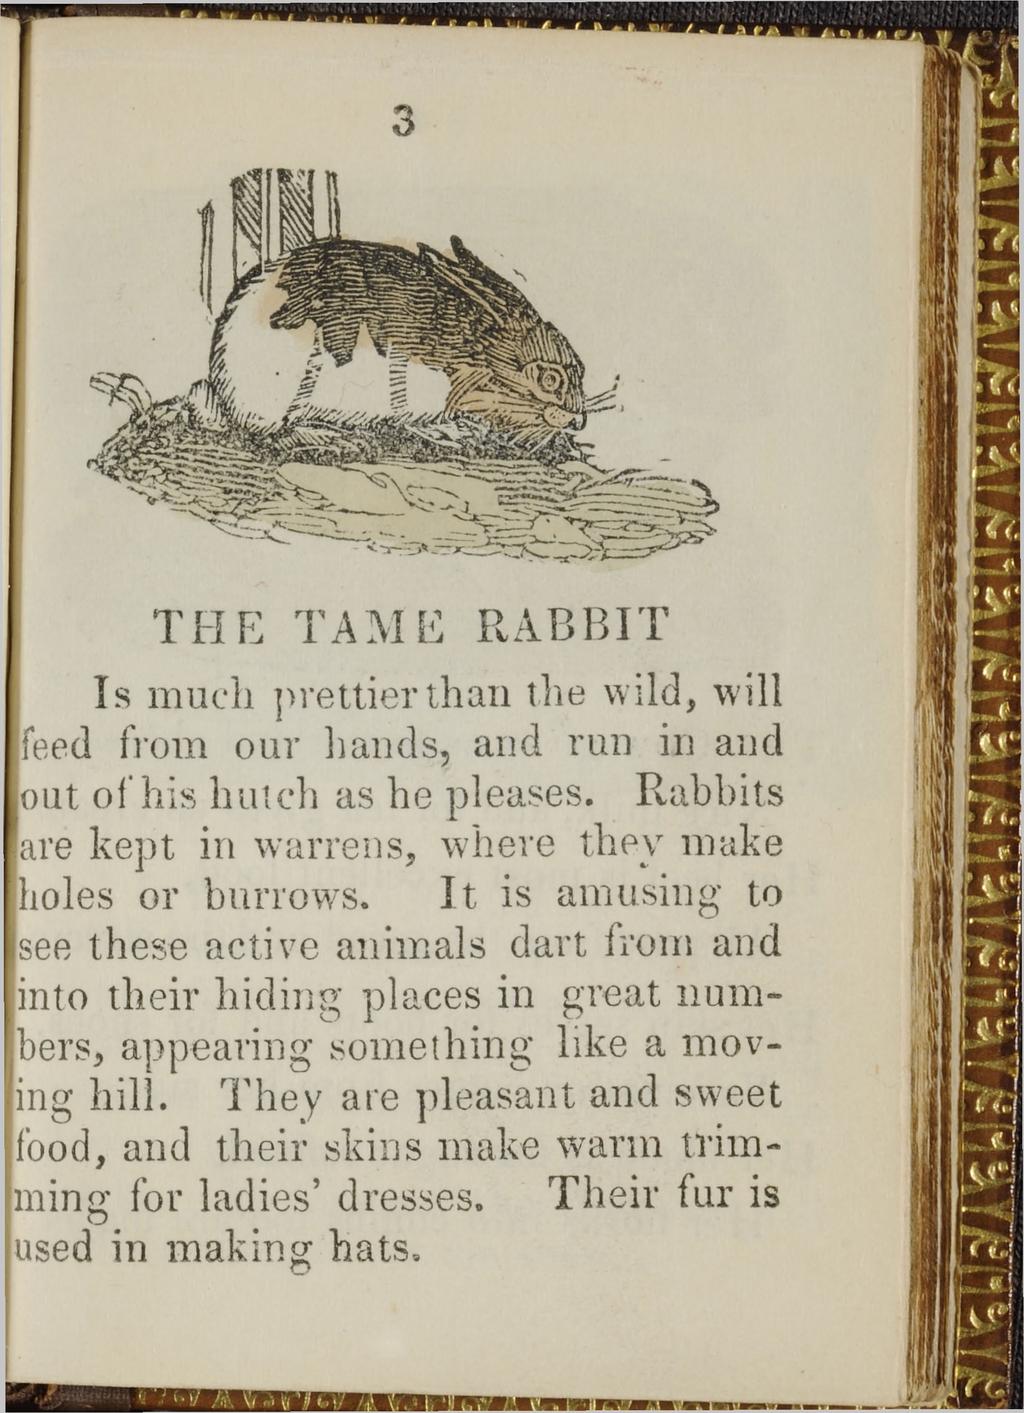 3 T H E T A M E R A B B IT Is much prettier than the wild, will feed from our hands, and run in and out of his hutch as he pleases. Rabbits are kept in warrens, where they make holes or burrows.